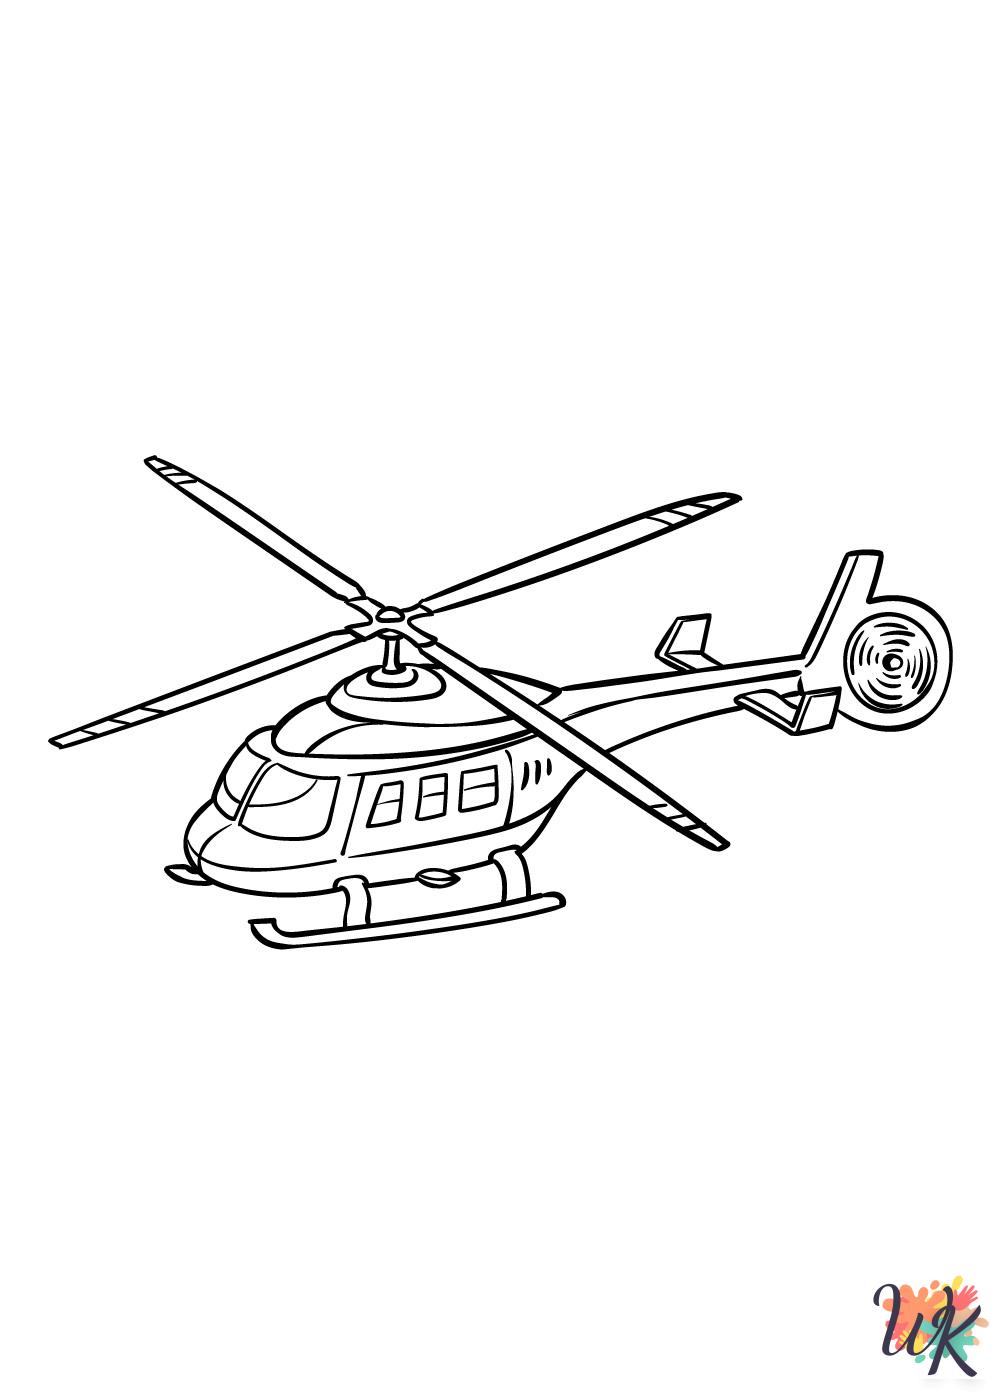 Helicopter ornament coloring pages